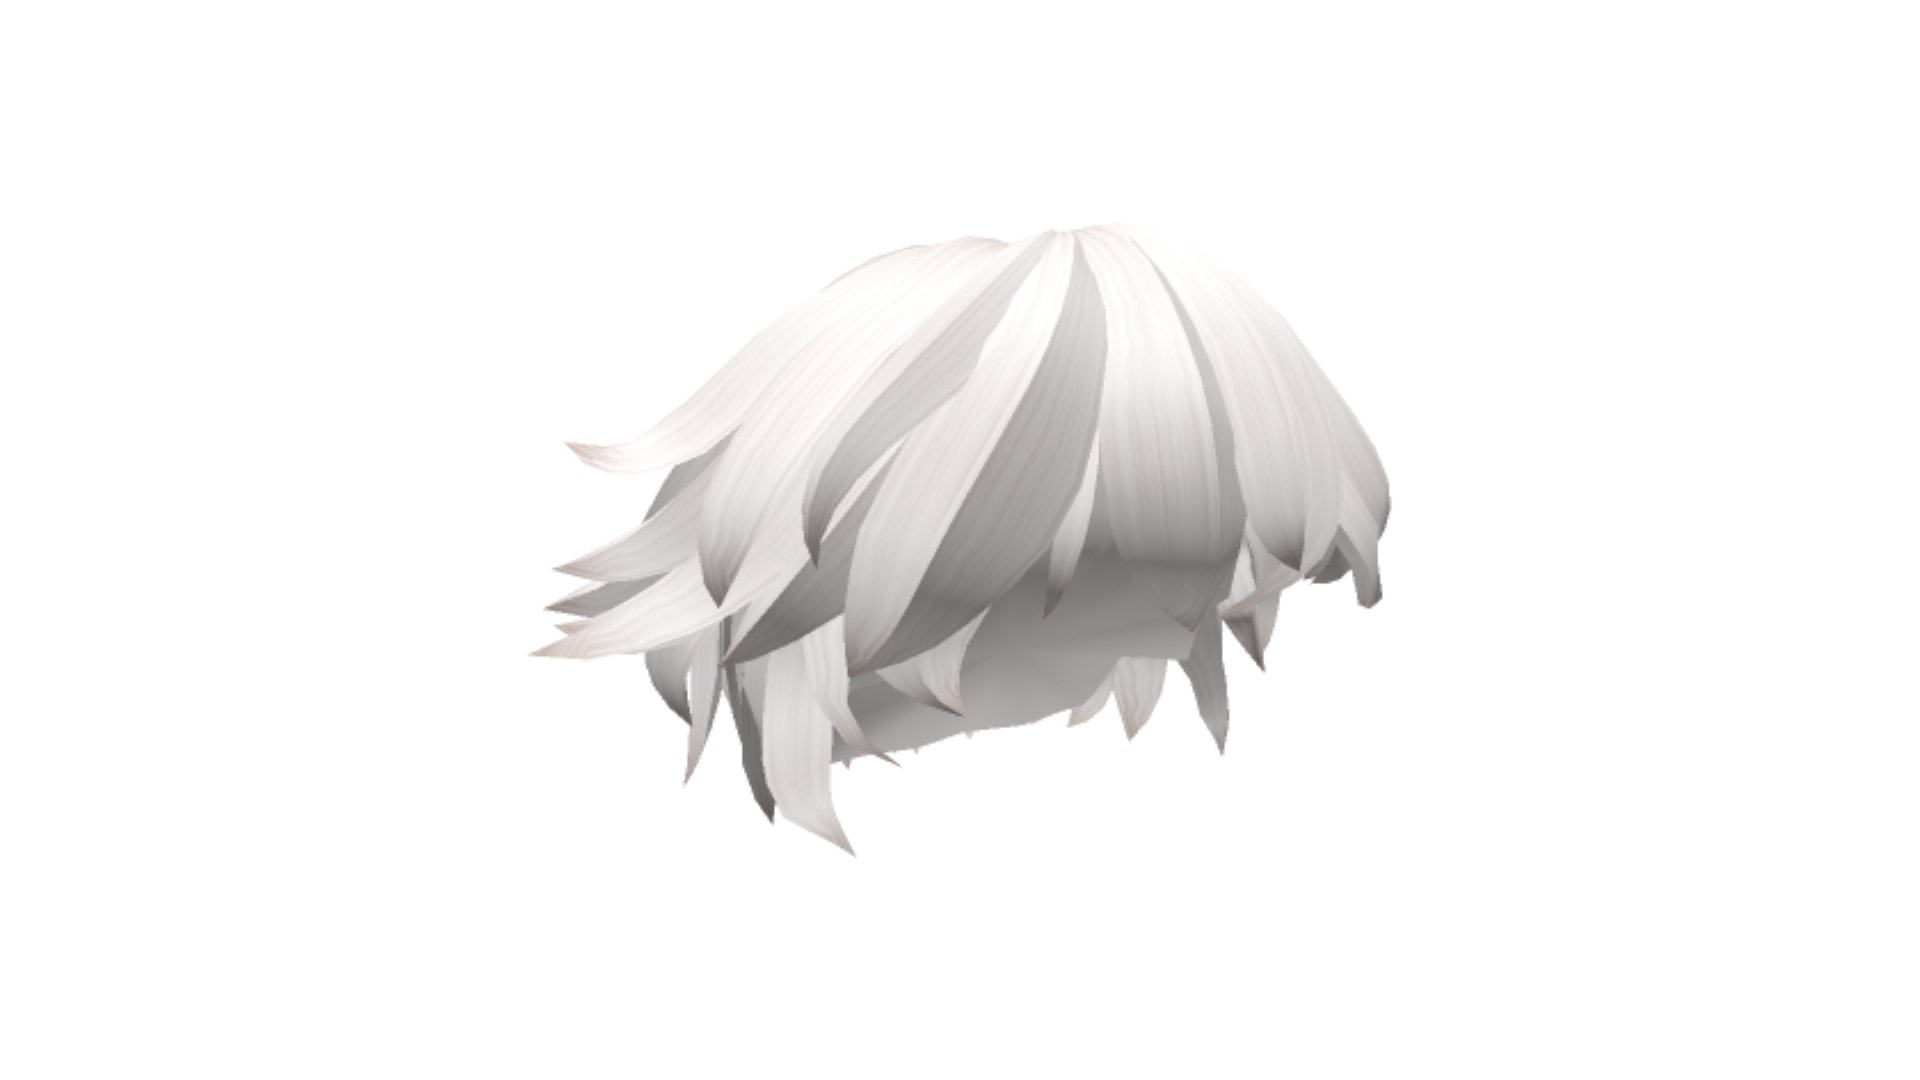 Mani on X: FREE UGC Limited Bacon Hair! Quantity: 275 Price: FREE! Join  the server to see how to get whitelisted to have a guaranteed spot:   #ROBLOX #FreeUgc #freeugclimited #ROBLOX #UGC